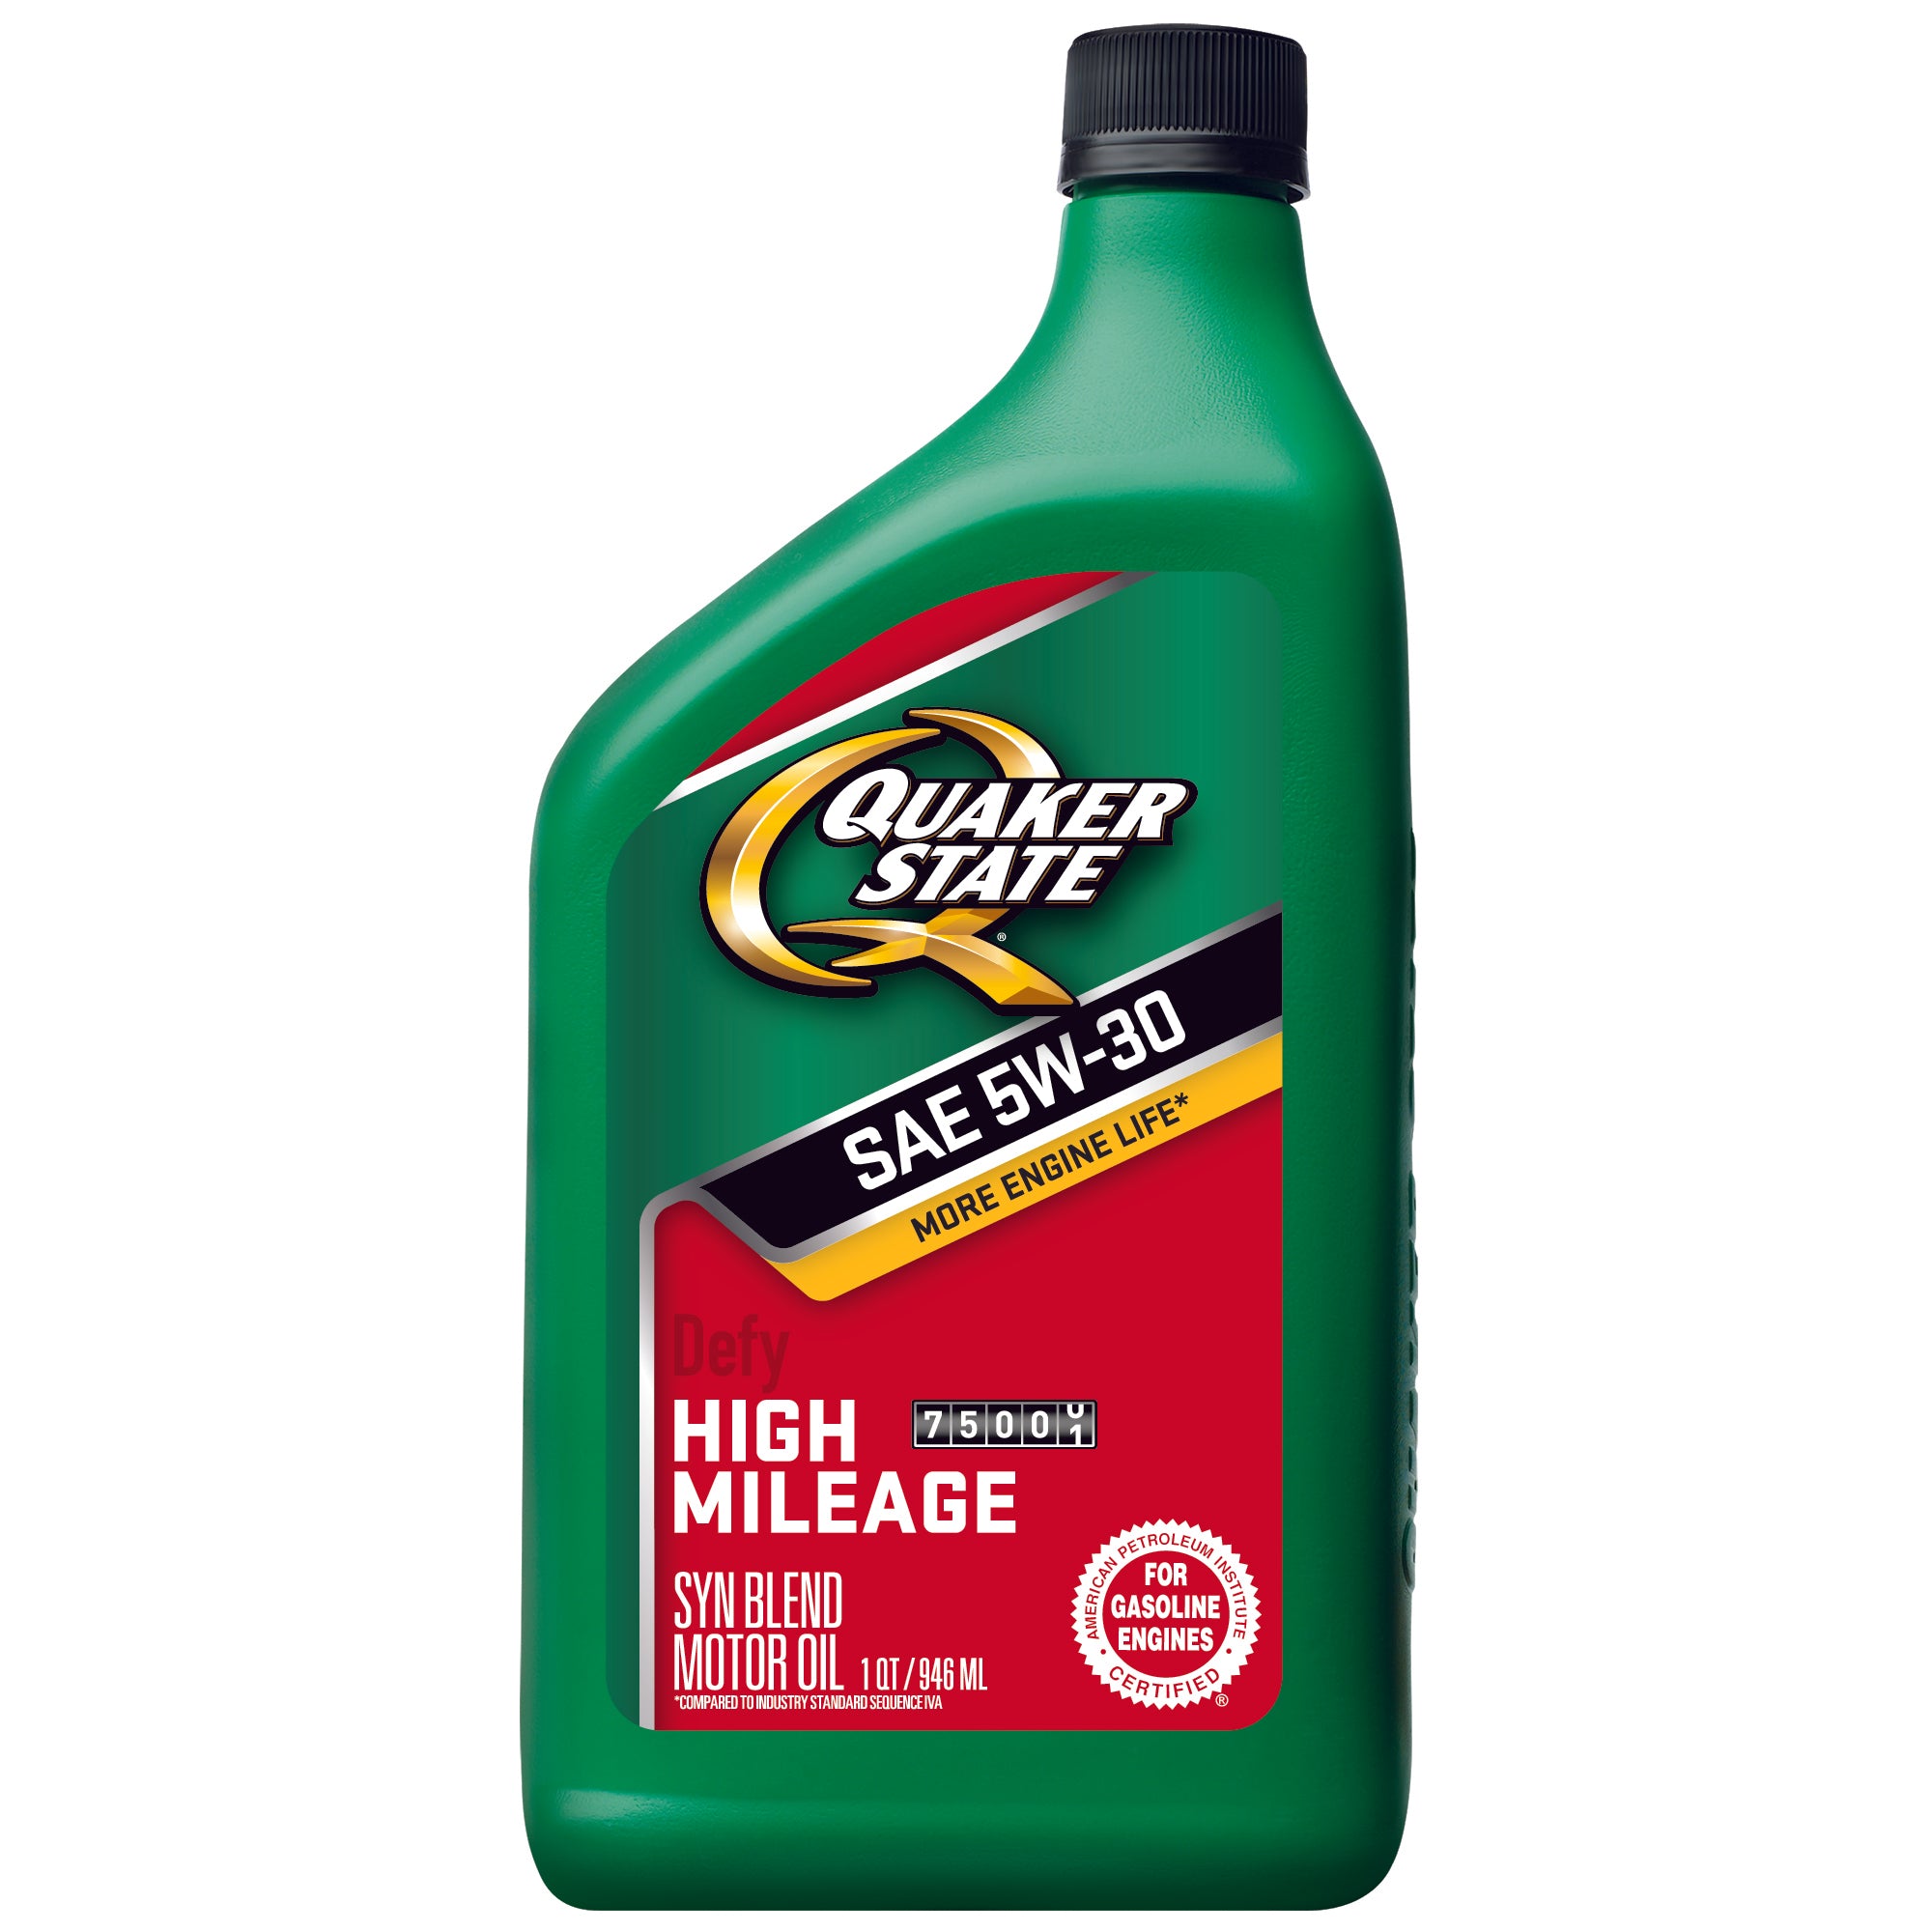 Quaker State Defy 5W 30 Synthetic Blend Motor Oil Case of 6 1 qt